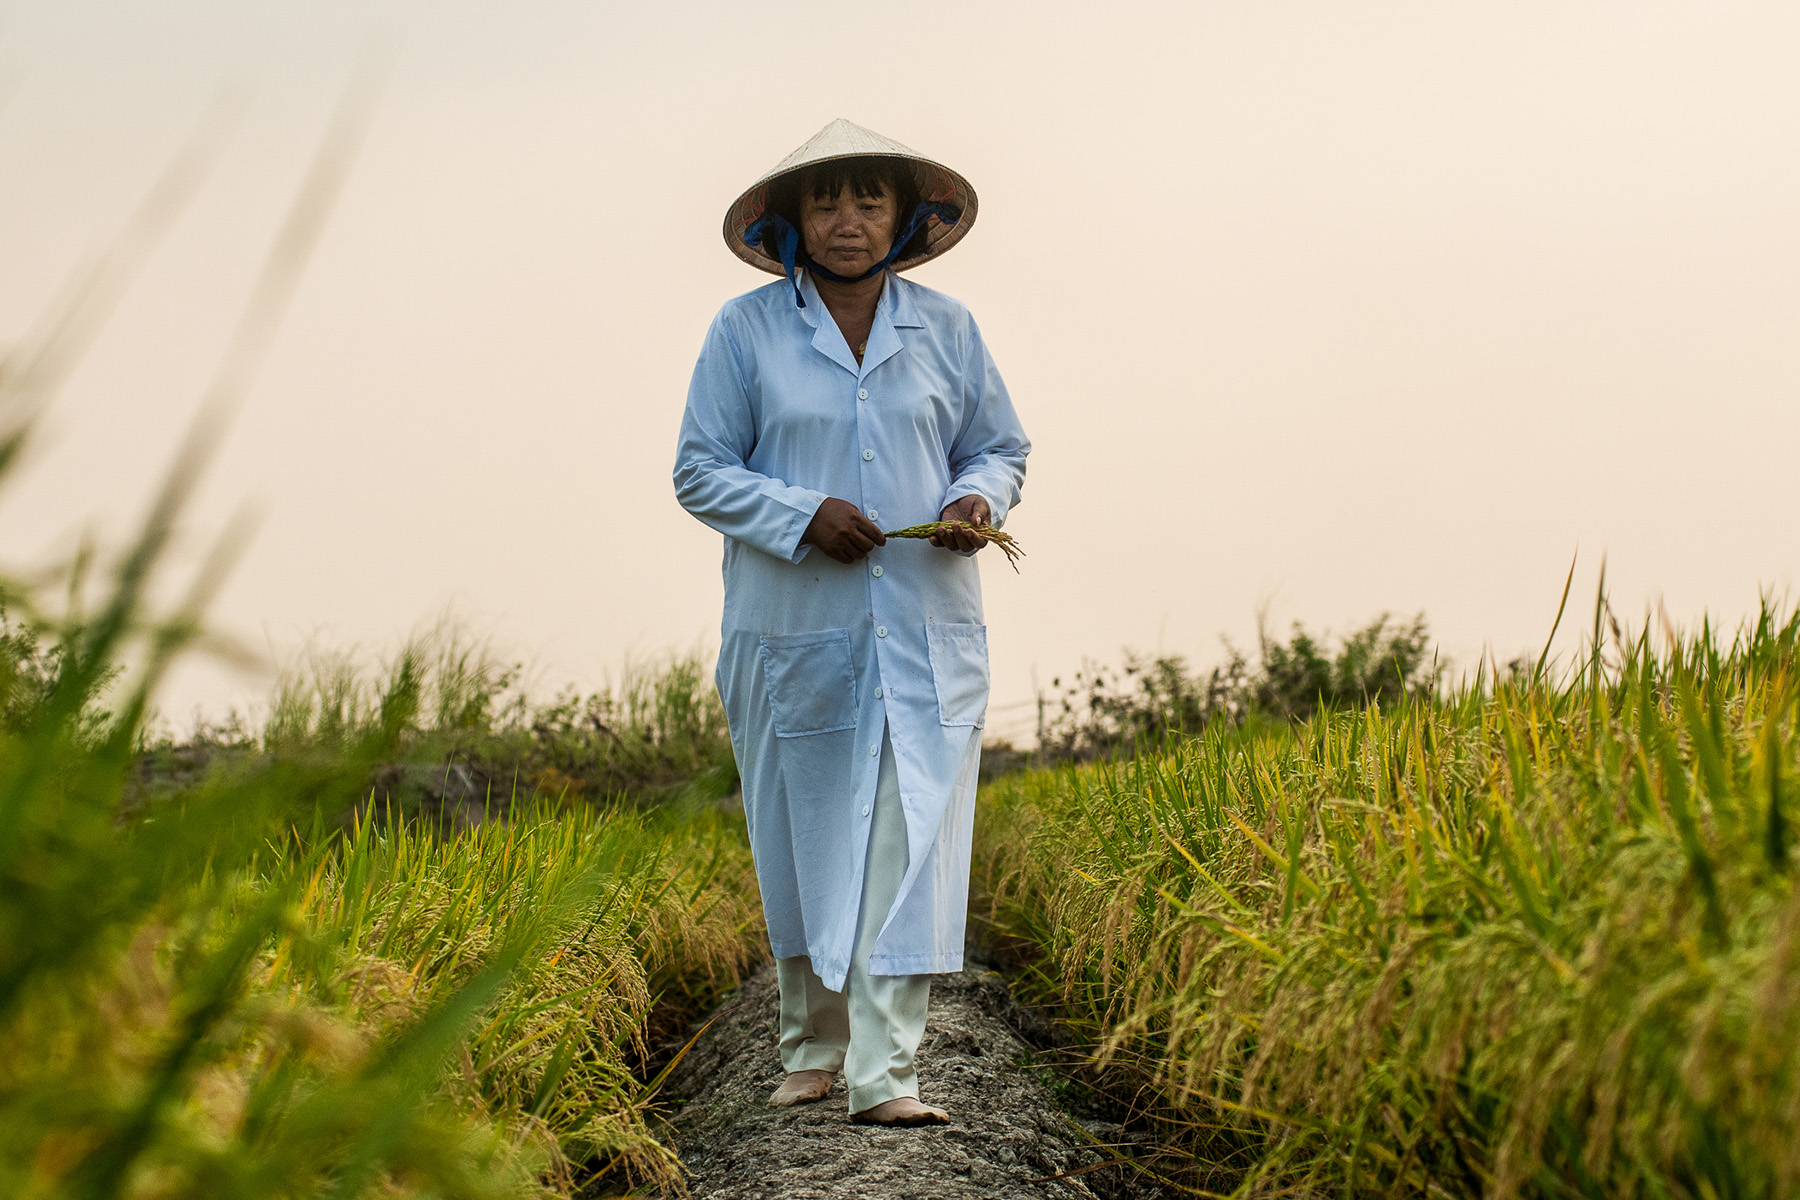 Prof. Nguyen Thi Lang, Cuu Long Delta Rice Research Institute breeder, researching drought, tolerant rice